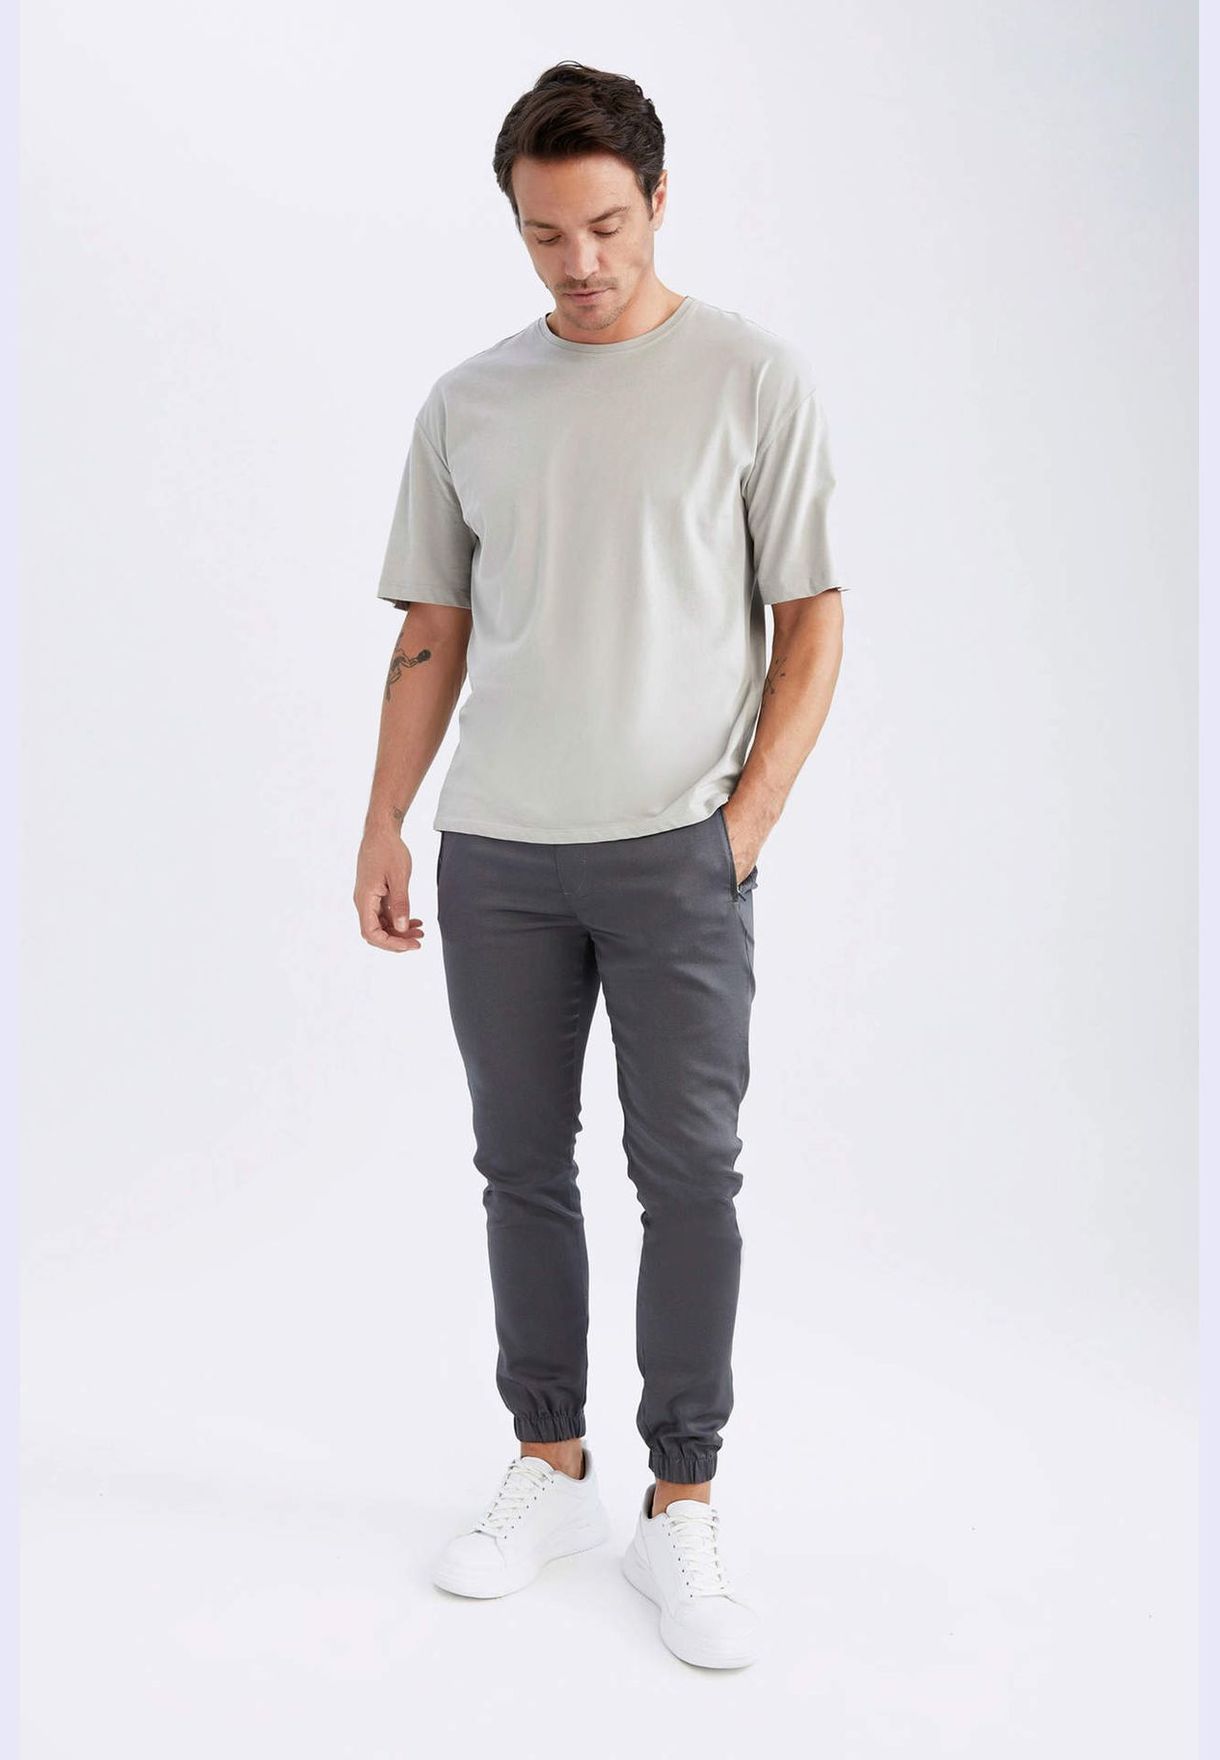 jogger Trousers